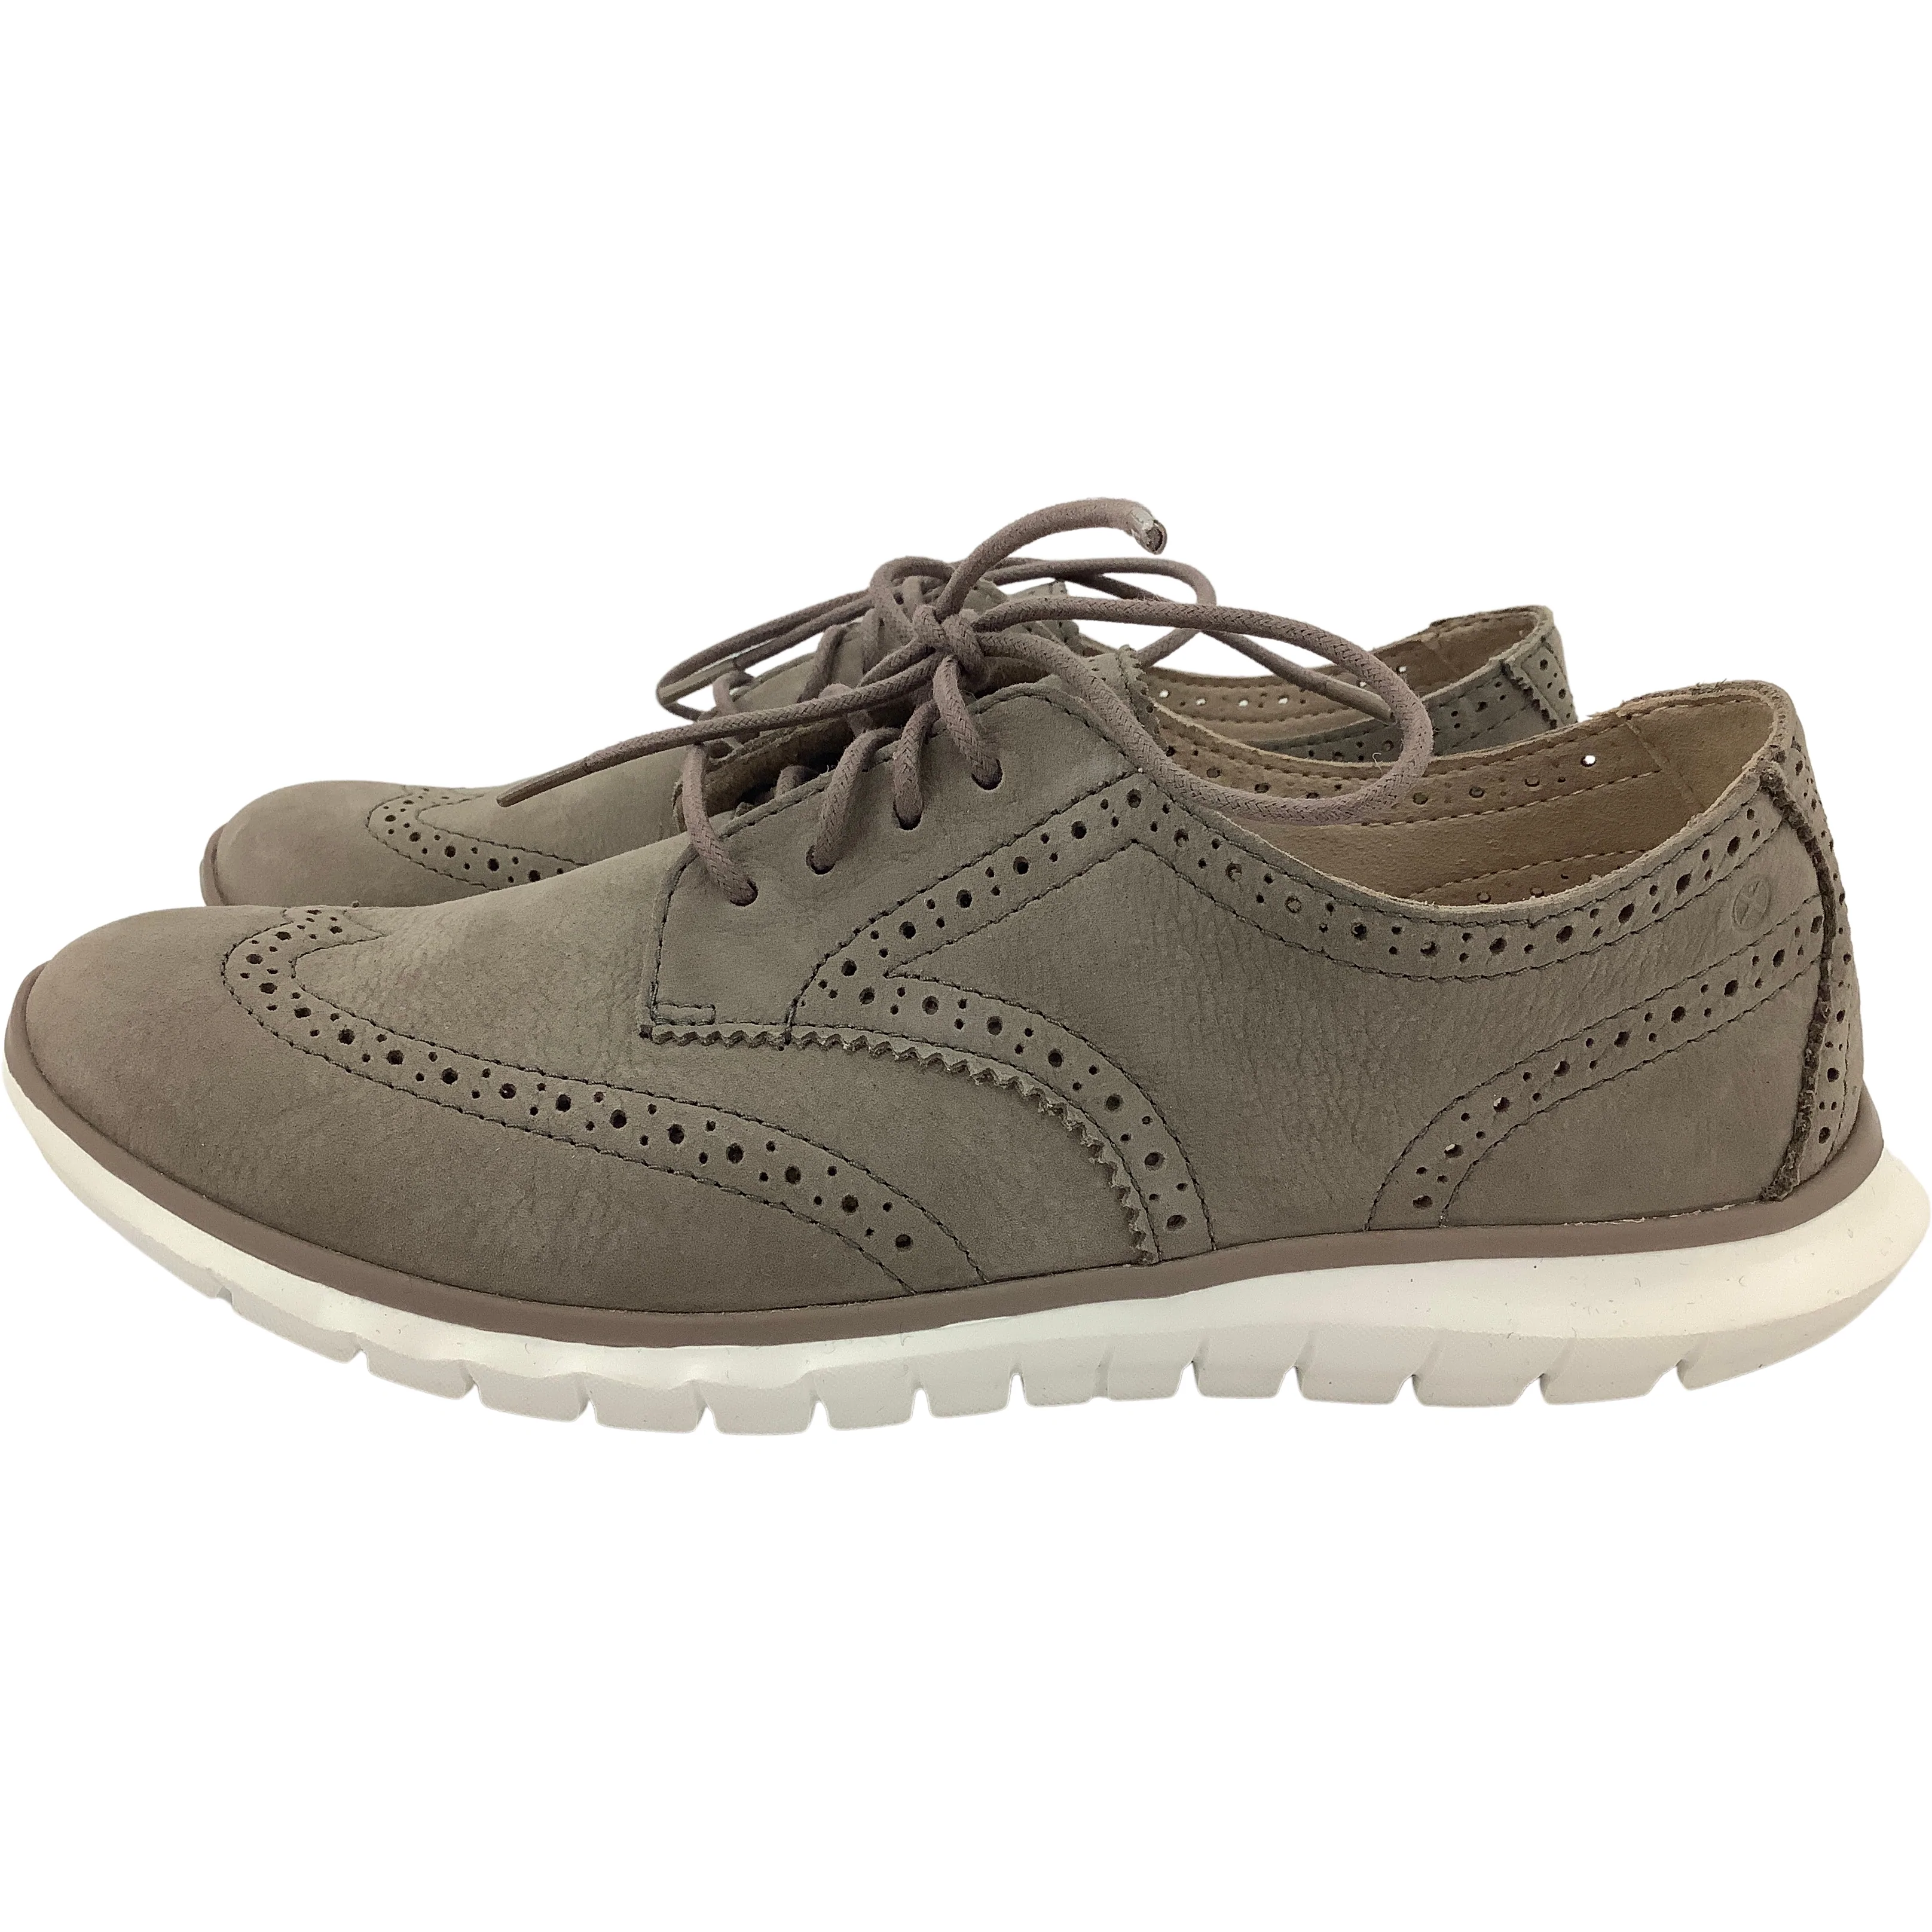 Hush Puppies Women's Shoes / Everyday Sneaker / Taupe / Size 8